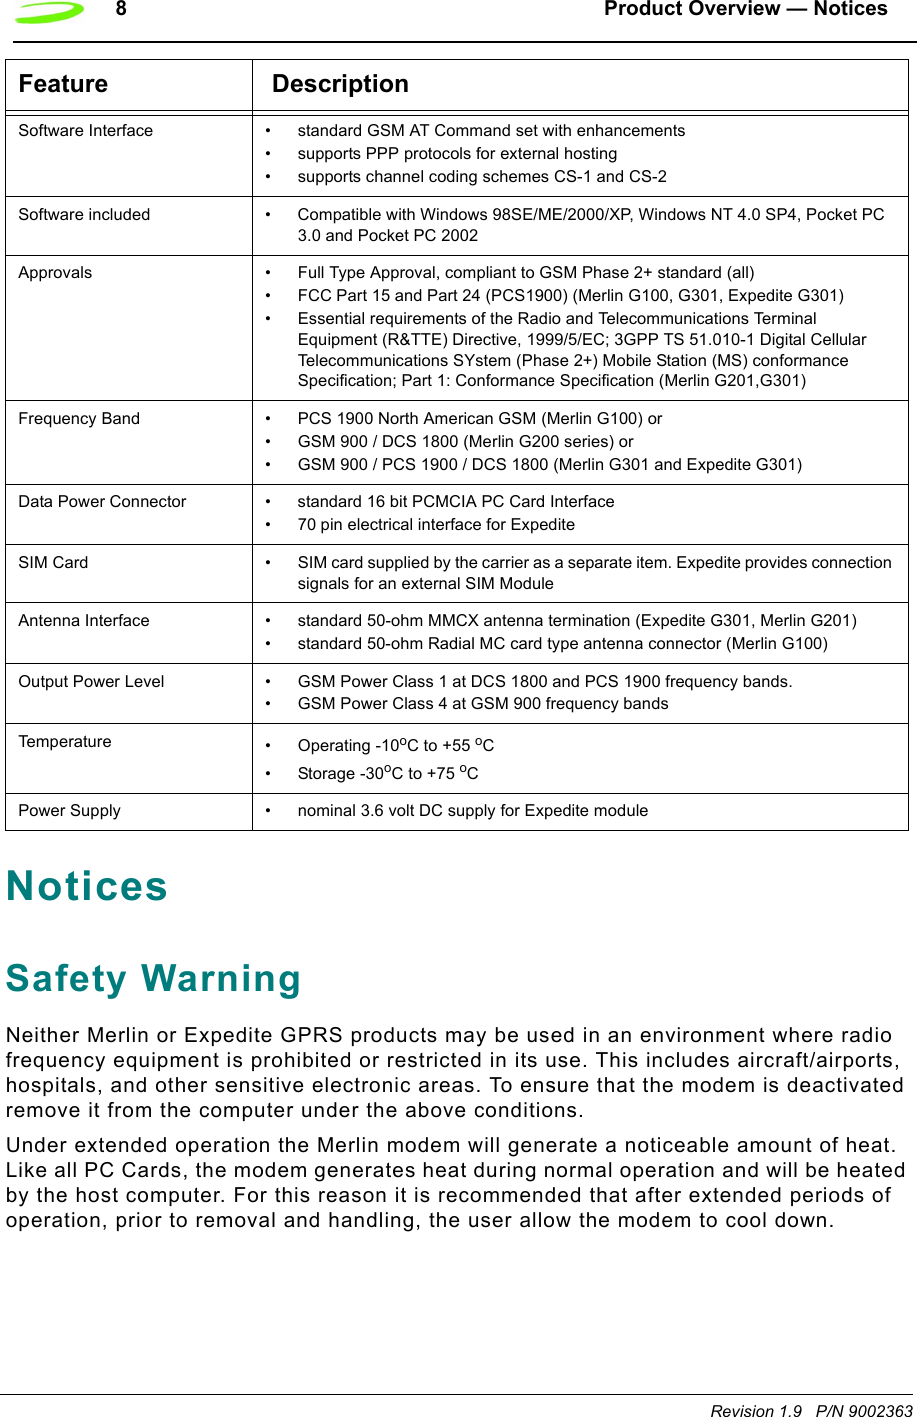 8 Product Overview — NoticesRevision 1.9   P/N 9002363NoticesSafety Warning Neither Merlin or Expedite GPRS products may be used in an environment where radio frequency equipment is prohibited or restricted in its use. This includes aircraft/airports, hospitals, and other sensitive electronic areas. To ensure that the modem is deactivated remove it from the computer under the above conditions.Under extended operation the Merlin modem will generate a noticeable amount of heat. Like all PC Cards, the modem generates heat during normal operation and will be heated by the host computer. For this reason it is recommended that after extended periods of operation, prior to removal and handling, the user allow the modem to cool down.Software Interface • standard GSM AT Command set with enhancements• supports PPP protocols for external hosting• supports channel coding schemes CS-1 and CS-2Software included • Compatible with Windows 98SE/ME/2000/XP, Windows NT 4.0 SP4, Pocket PC 3.0 and Pocket PC 2002Approvals • Full Type Approval, compliant to GSM Phase 2+ standard (all)• FCC Part 15 and Part 24 (PCS1900) (Merlin G100, G301, Expedite G301)• Essential requirements of the Radio and Telecommunications Terminal Equipment (R&amp;TTE) Directive, 1999/5/EC; 3GPP TS 51.010-1 Digital Cellular Telecommunications SYstem (Phase 2+) Mobile Station (MS) conformance Specification; Part 1: Conformance Specification (Merlin G201,G301)Frequency Band • PCS 1900 North American GSM (Merlin G100) or• GSM 900 / DCS 1800 (Merlin G200 series) or• GSM 900 / PCS 1900 / DCS 1800 (Merlin G301 and Expedite G301)Data Power Connector • standard 16 bit PCMCIA PC Card Interface• 70 pin electrical interface for ExpediteSIM Card • SIM card supplied by the carrier as a separate item. Expedite provides connection signals for an external SIM ModuleAntenna Interface • standard 50-ohm MMCX antenna termination (Expedite G301, Merlin G201)• standard 50-ohm Radial MC card type antenna connector (Merlin G100)Output Power Level • GSM Power Class 1 at DCS 1800 and PCS 1900 frequency bands.• GSM Power Class 4 at GSM 900 frequency bandsTemperature • Operating -10oC to +55 oC• Storage -30oC to +75 oCPower Supply • nominal 3.6 volt DC supply for Expedite moduleFeature  Description